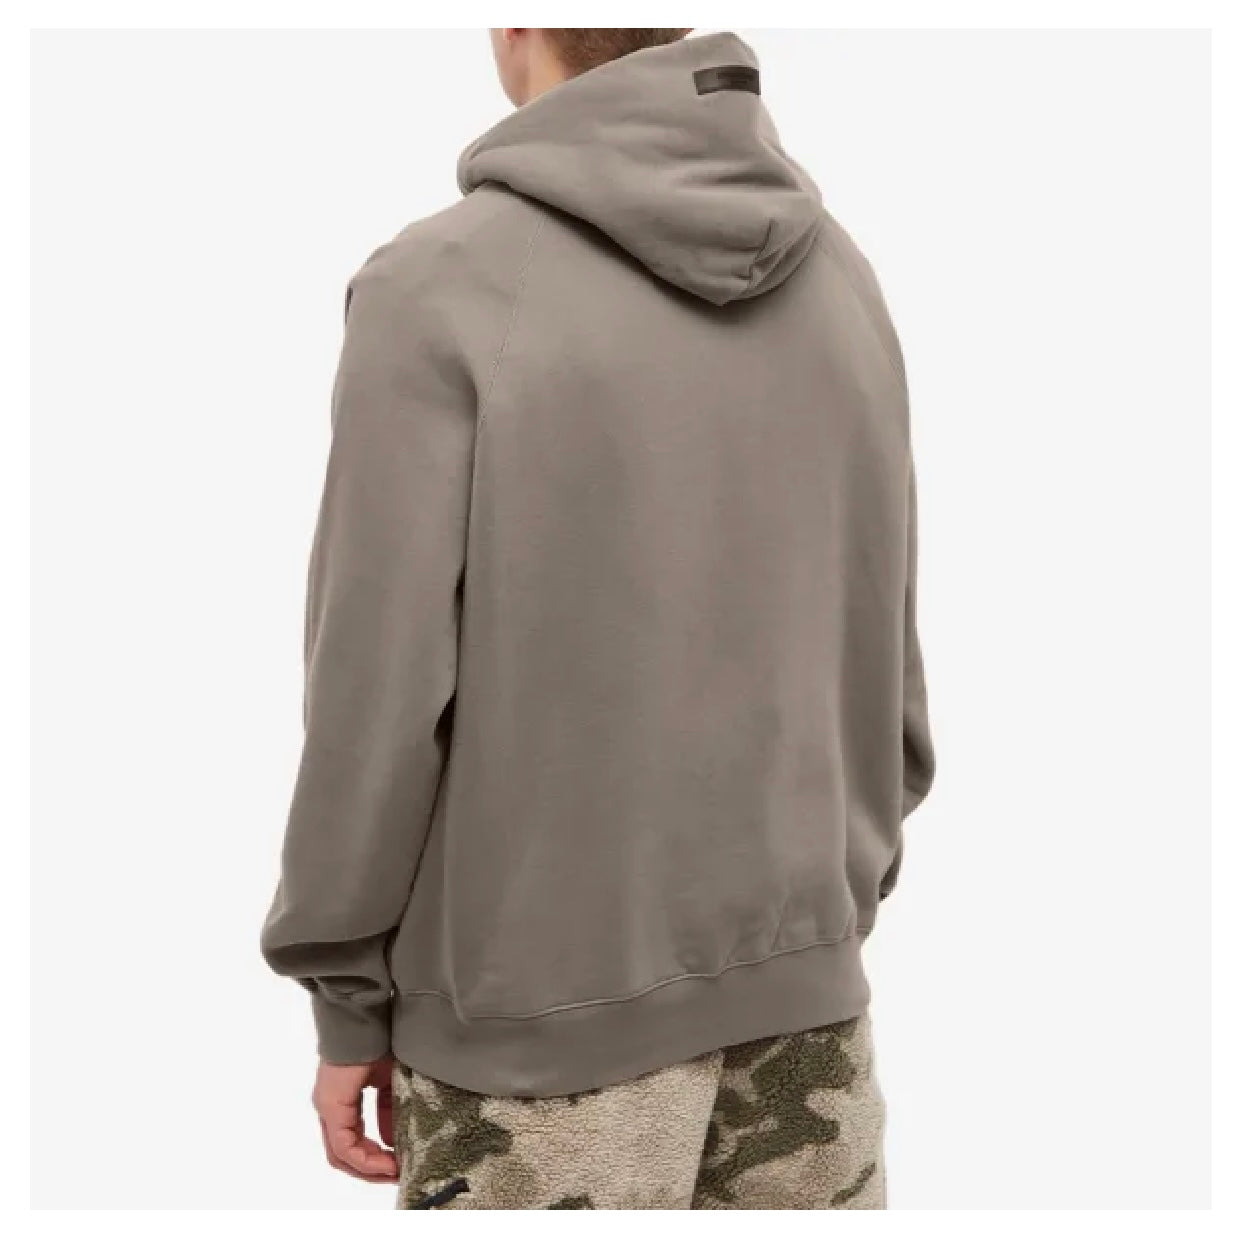 FEAR OF GOD Essentials Hoodie 'Desert Taupe'